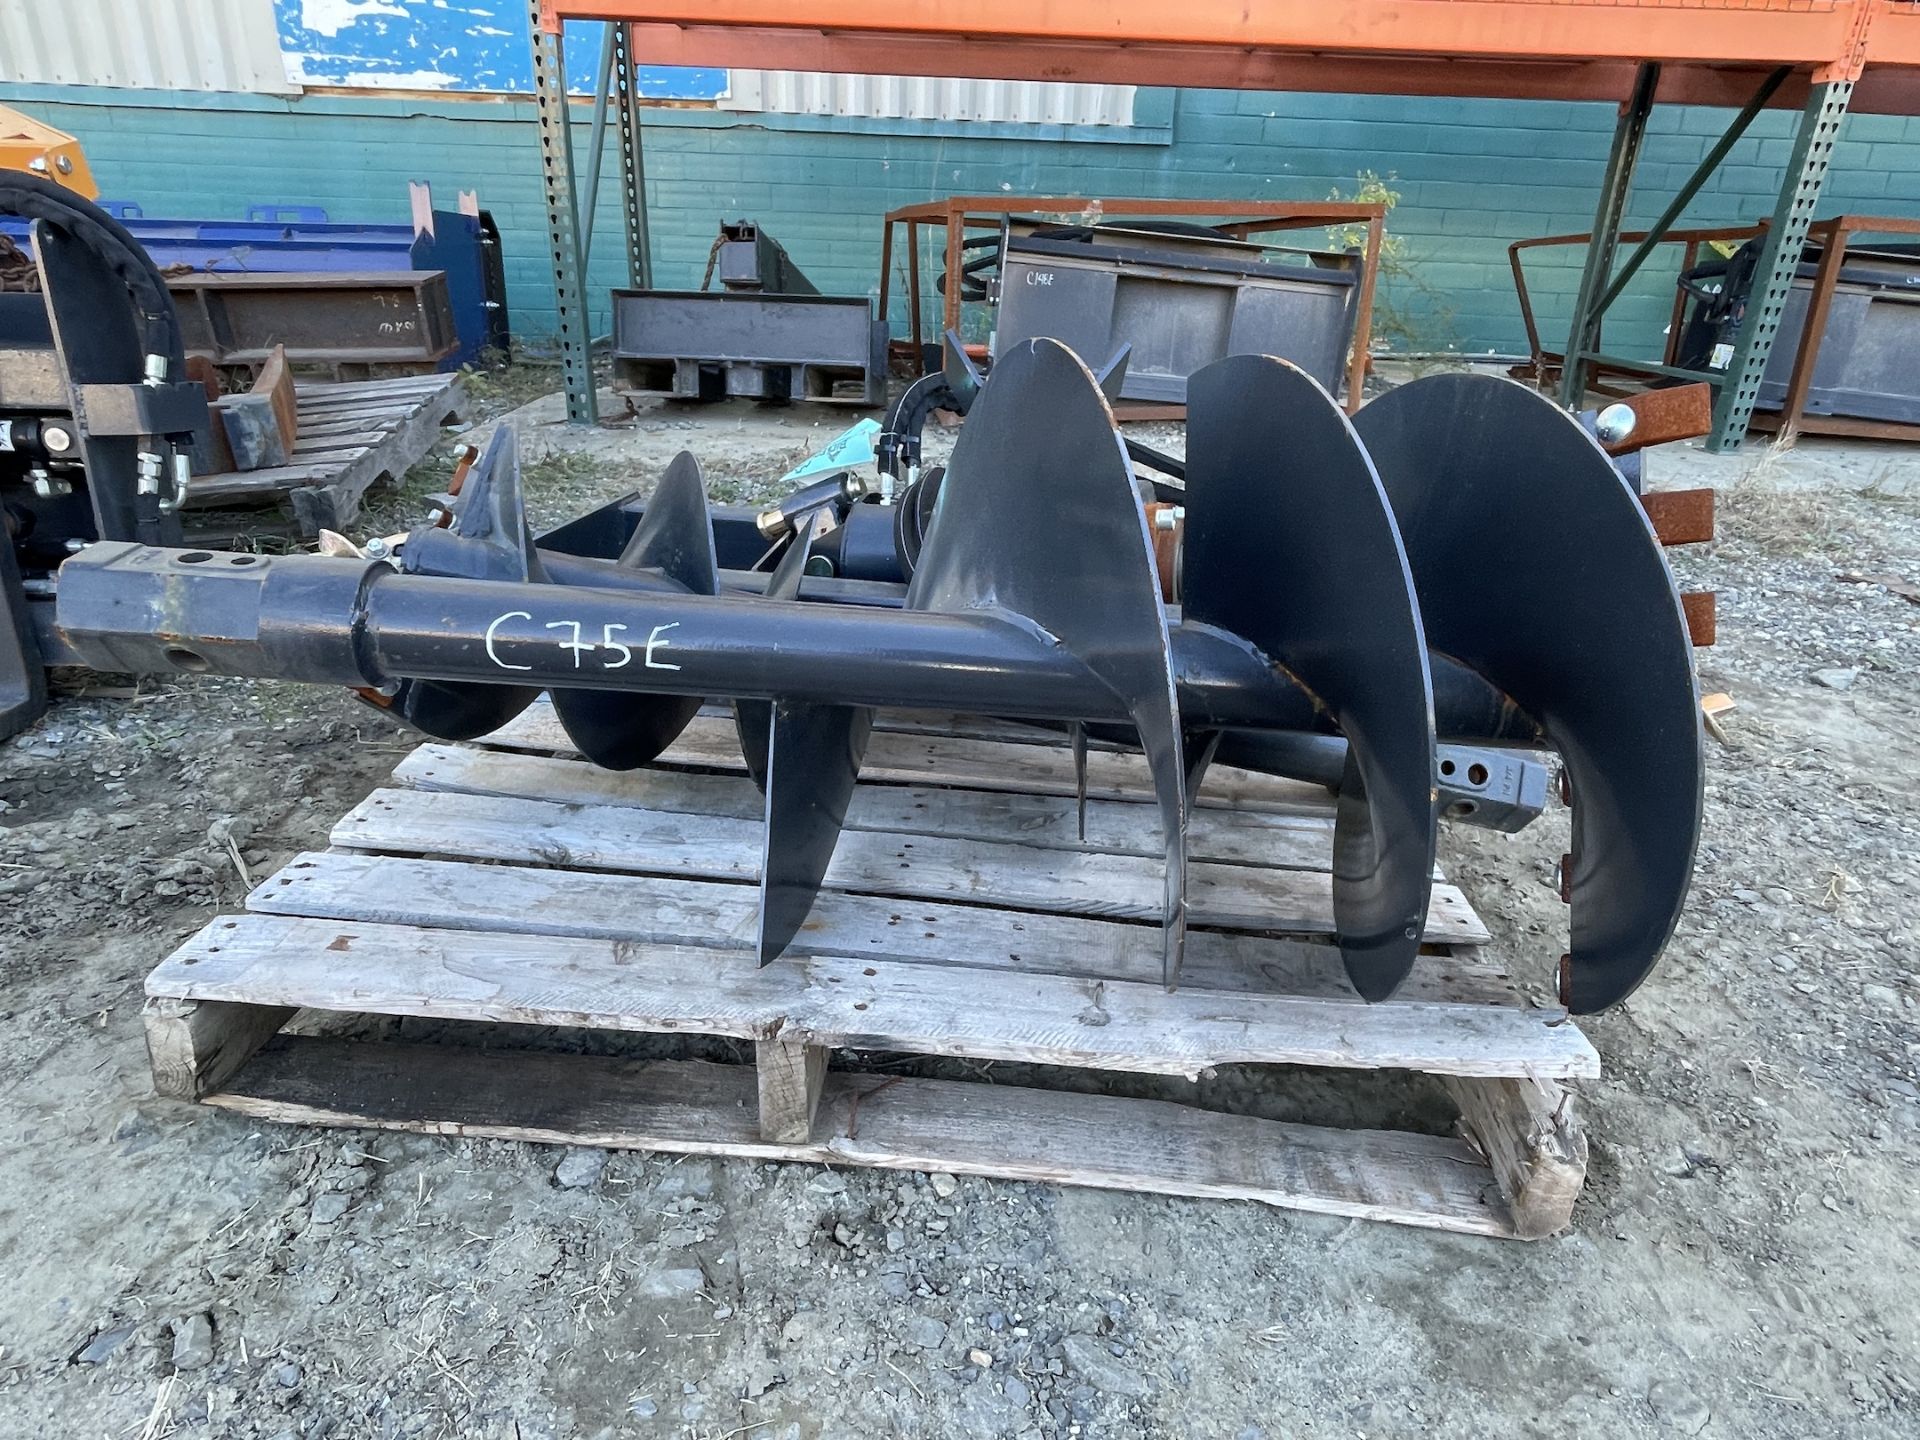 Brand New Wolverine Auger Skid Steer Attachment (C75E) - Image 6 of 10